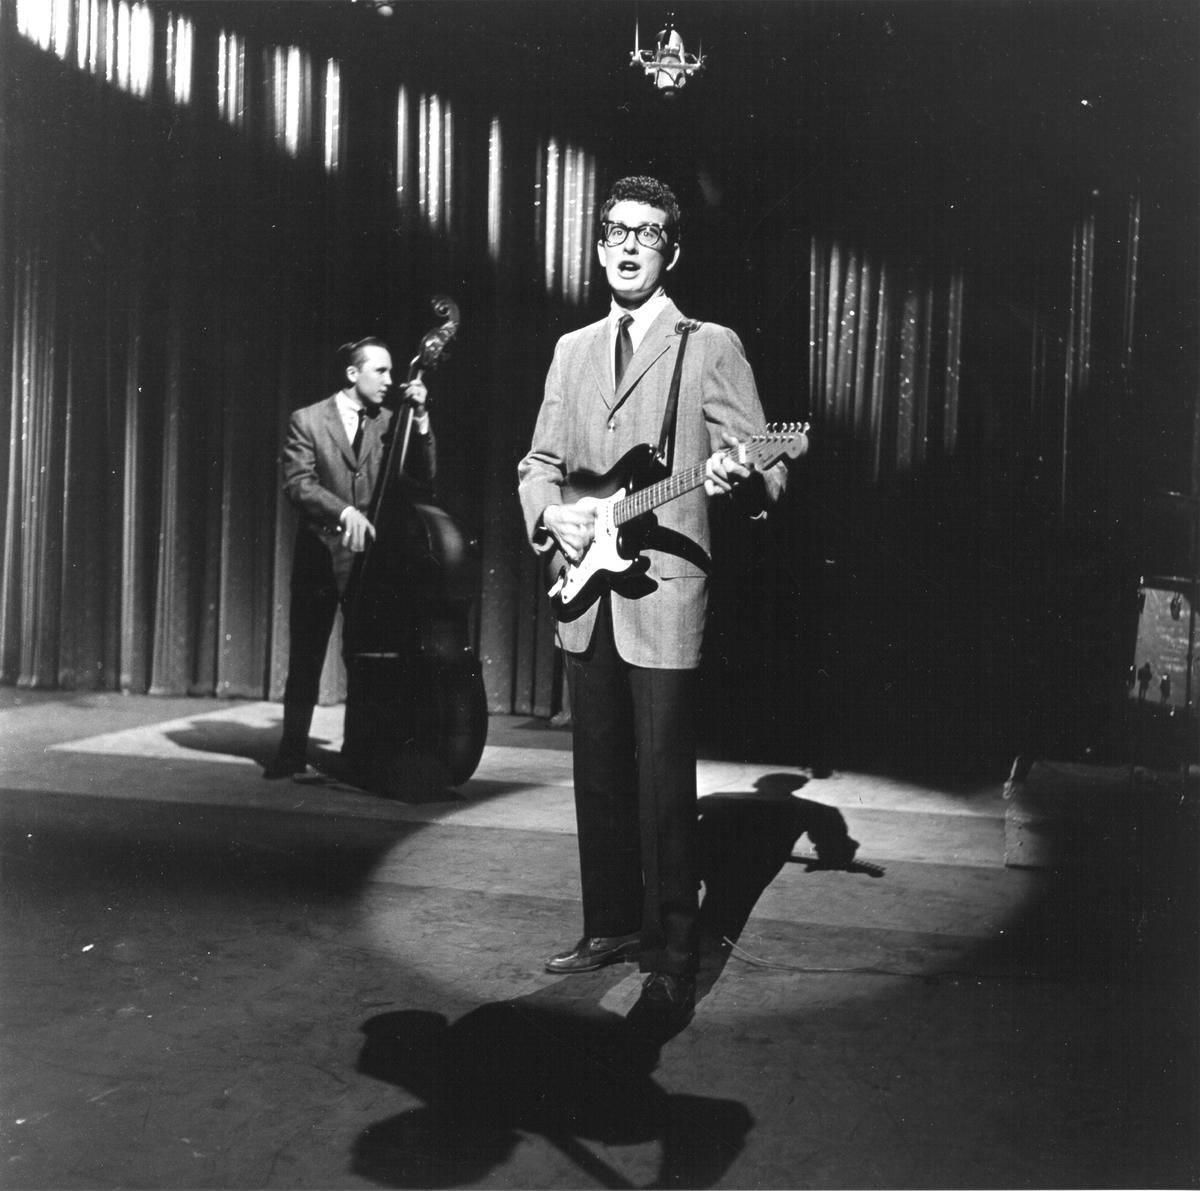 <p>One of the most infamous of Ed Sullivan's grudges was against Buddy Holly and his band, The Crickets. Sullivan thought the lyrics to their song "Oh Boy" were too suggestive for his audience and asked (or demanded) that they perform a different song. </p> <p>Holly refused though and, as retribution, Sullivan mispronounced Holly's name when introducing the band and made sure that his guitar amplifier was turned off. Now that's what we call petty!</p>